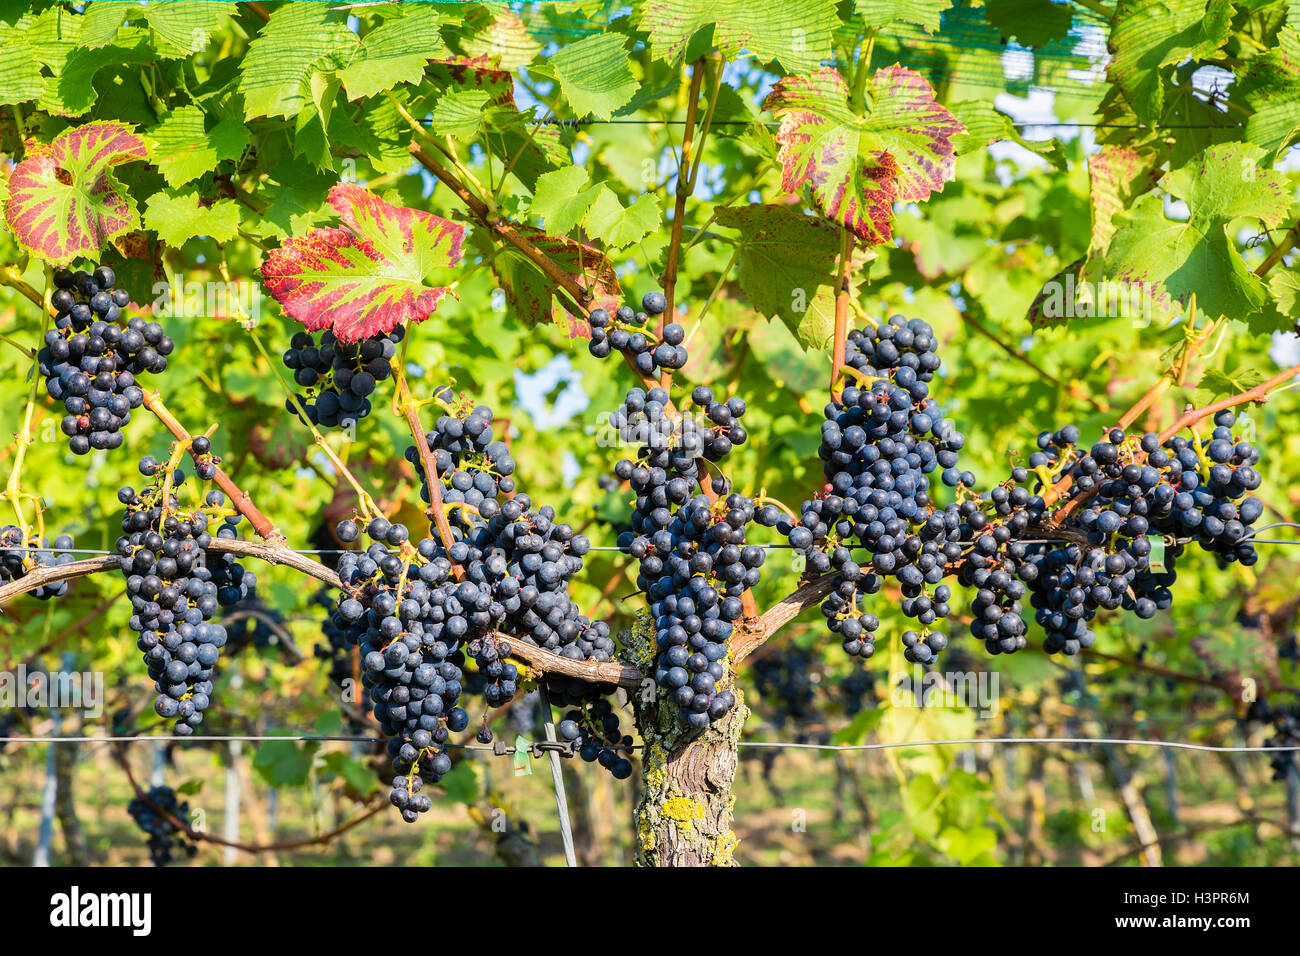 Many hanging blue grape bunches in vineyard Stock Photo